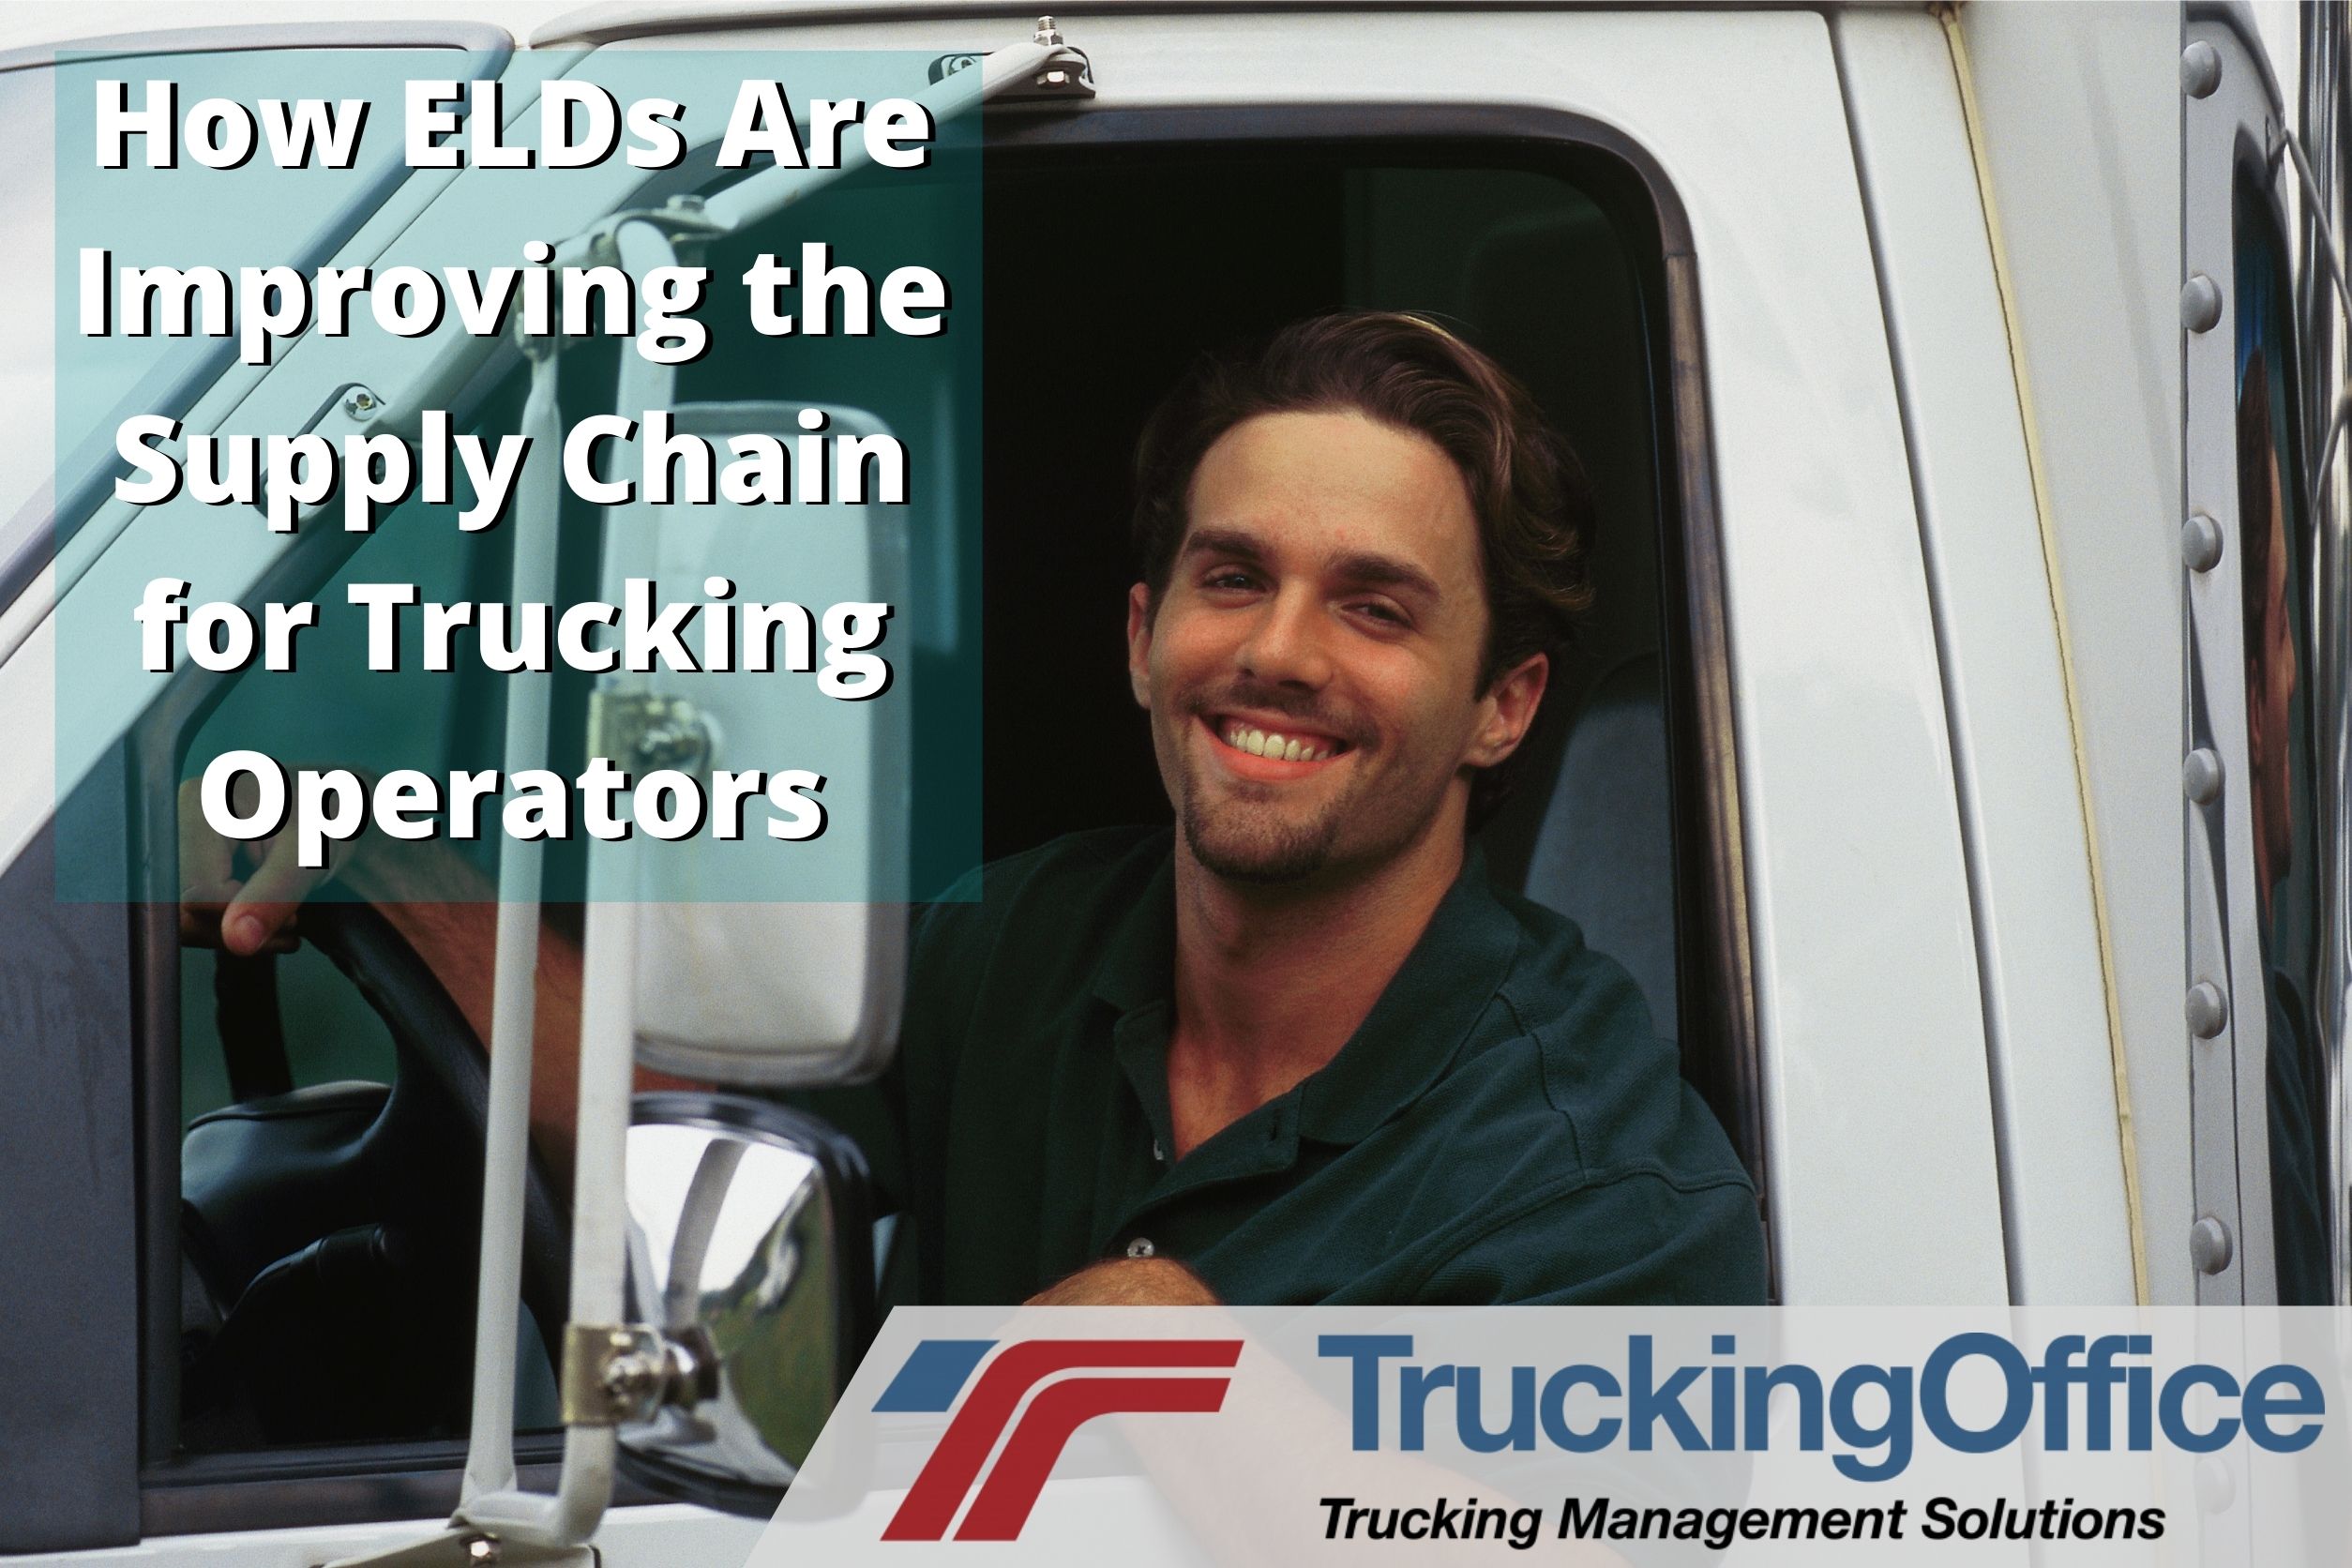 How ELDs Are Improving the Supply Chain for Trucking Operators